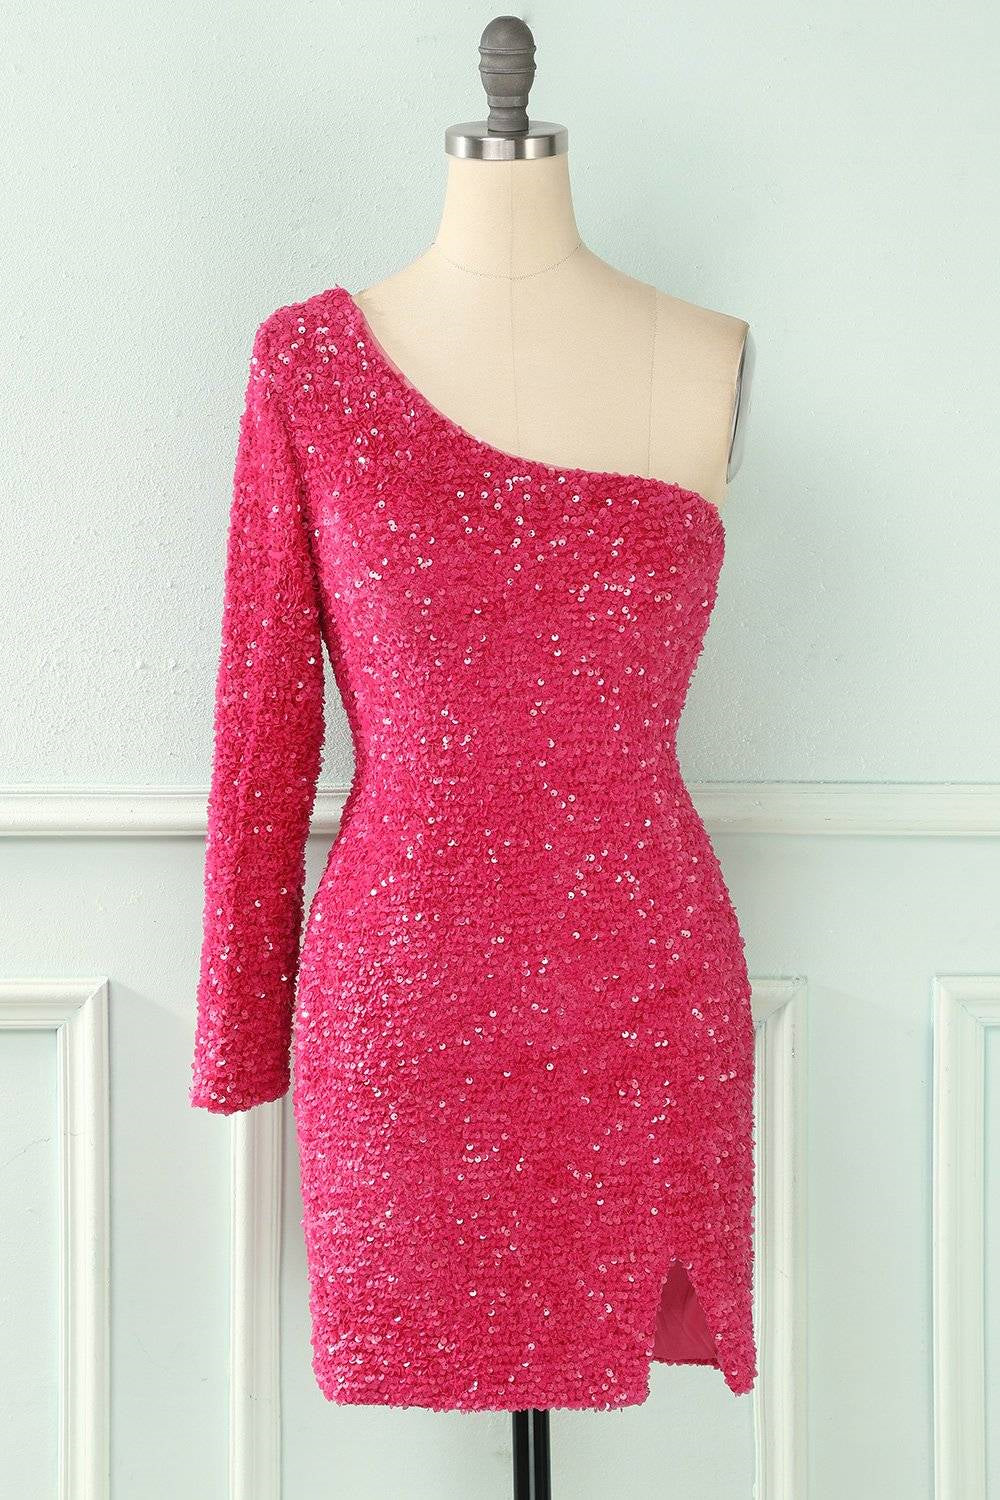 Bodycon One Shoulder Long Sleeves Sparkly Mini Homecoming Dress